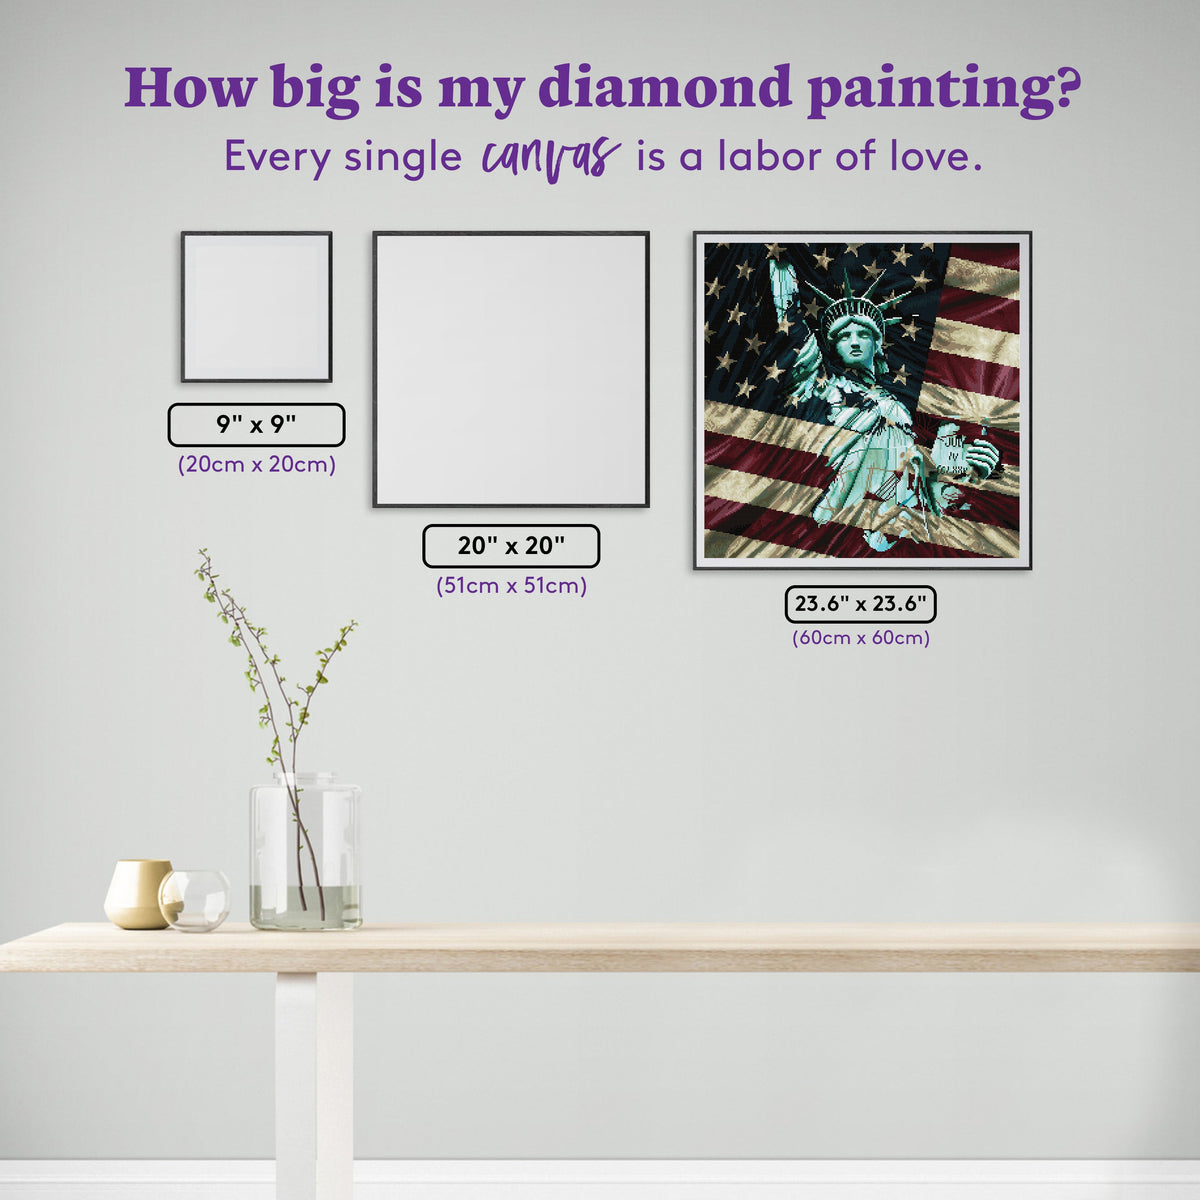 Diamond Painting Liberty Flag 23.6" x 23.6" (60cm x 60cm) / Square with 44 Colors including 1 AB and 2 Fairy Dust Diamonds / 58,081